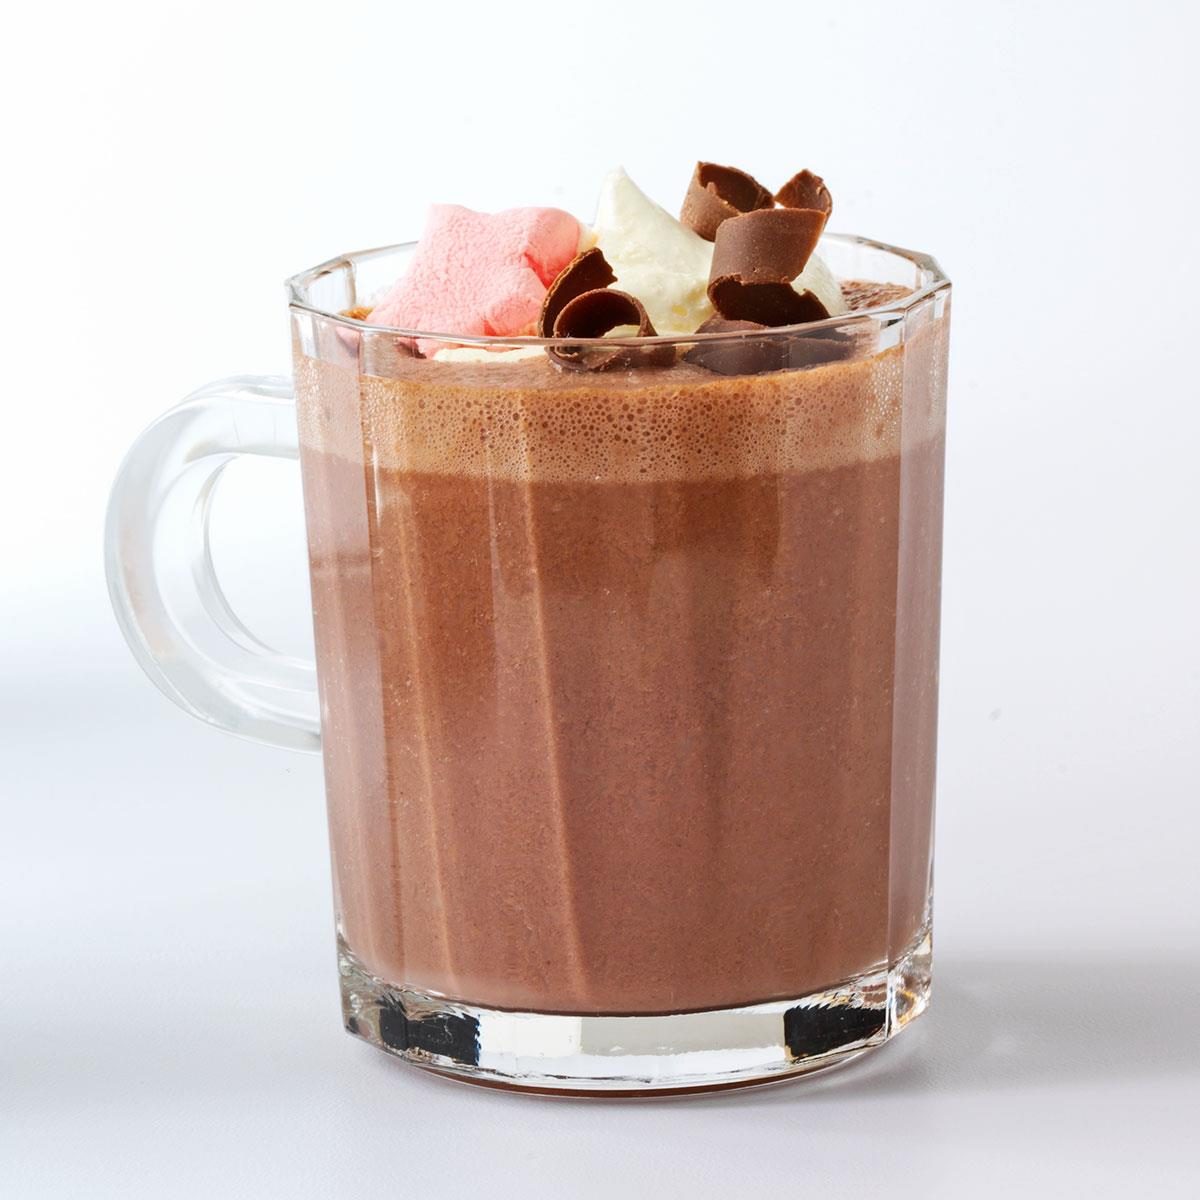 https://www.tasteofhome.com/wp-content/uploads/2018/01/Raspberry-Hot-Cocoa_exps139459_TH2236622D08_02_5bC_RMS-5.jpg?fit=700%2C1024